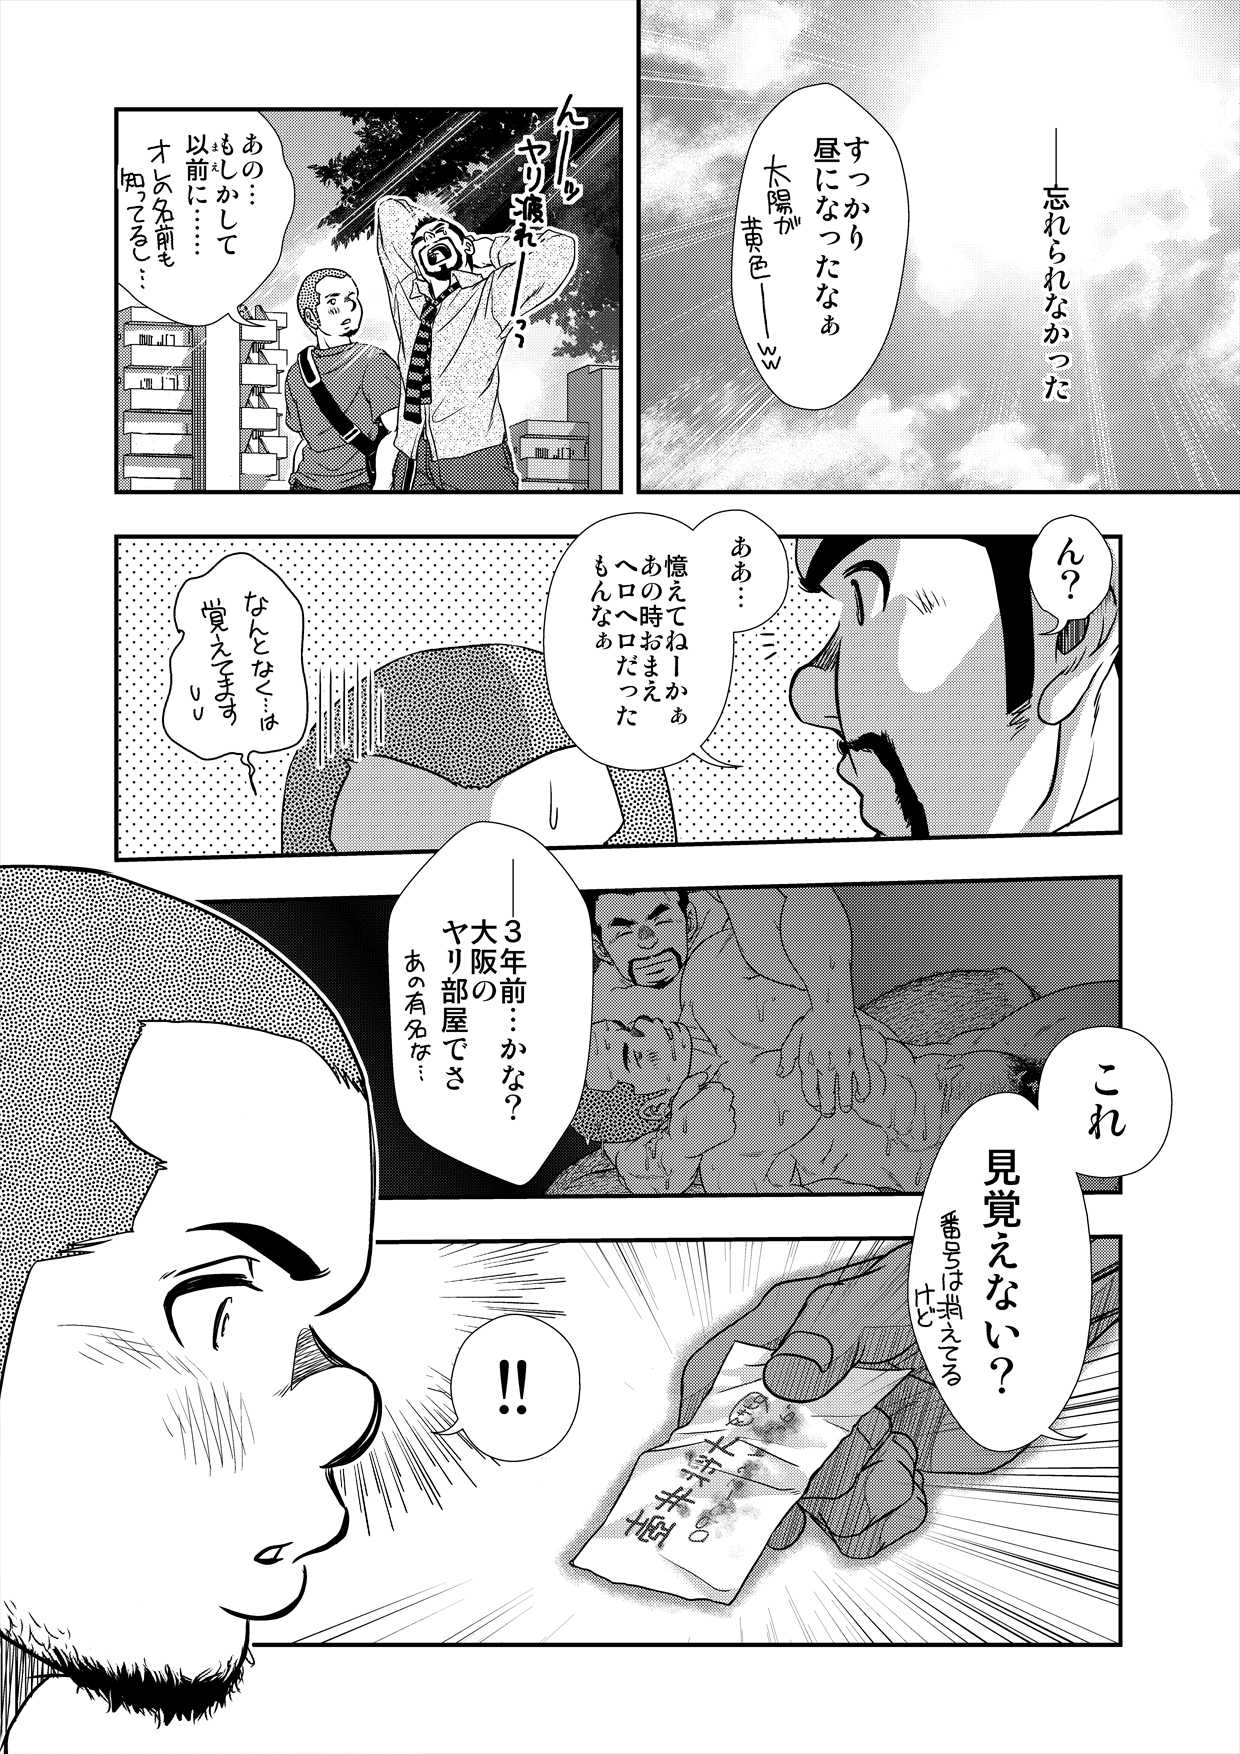 [Kenta] On the Sunny Side of the Street (doujin + GC) 